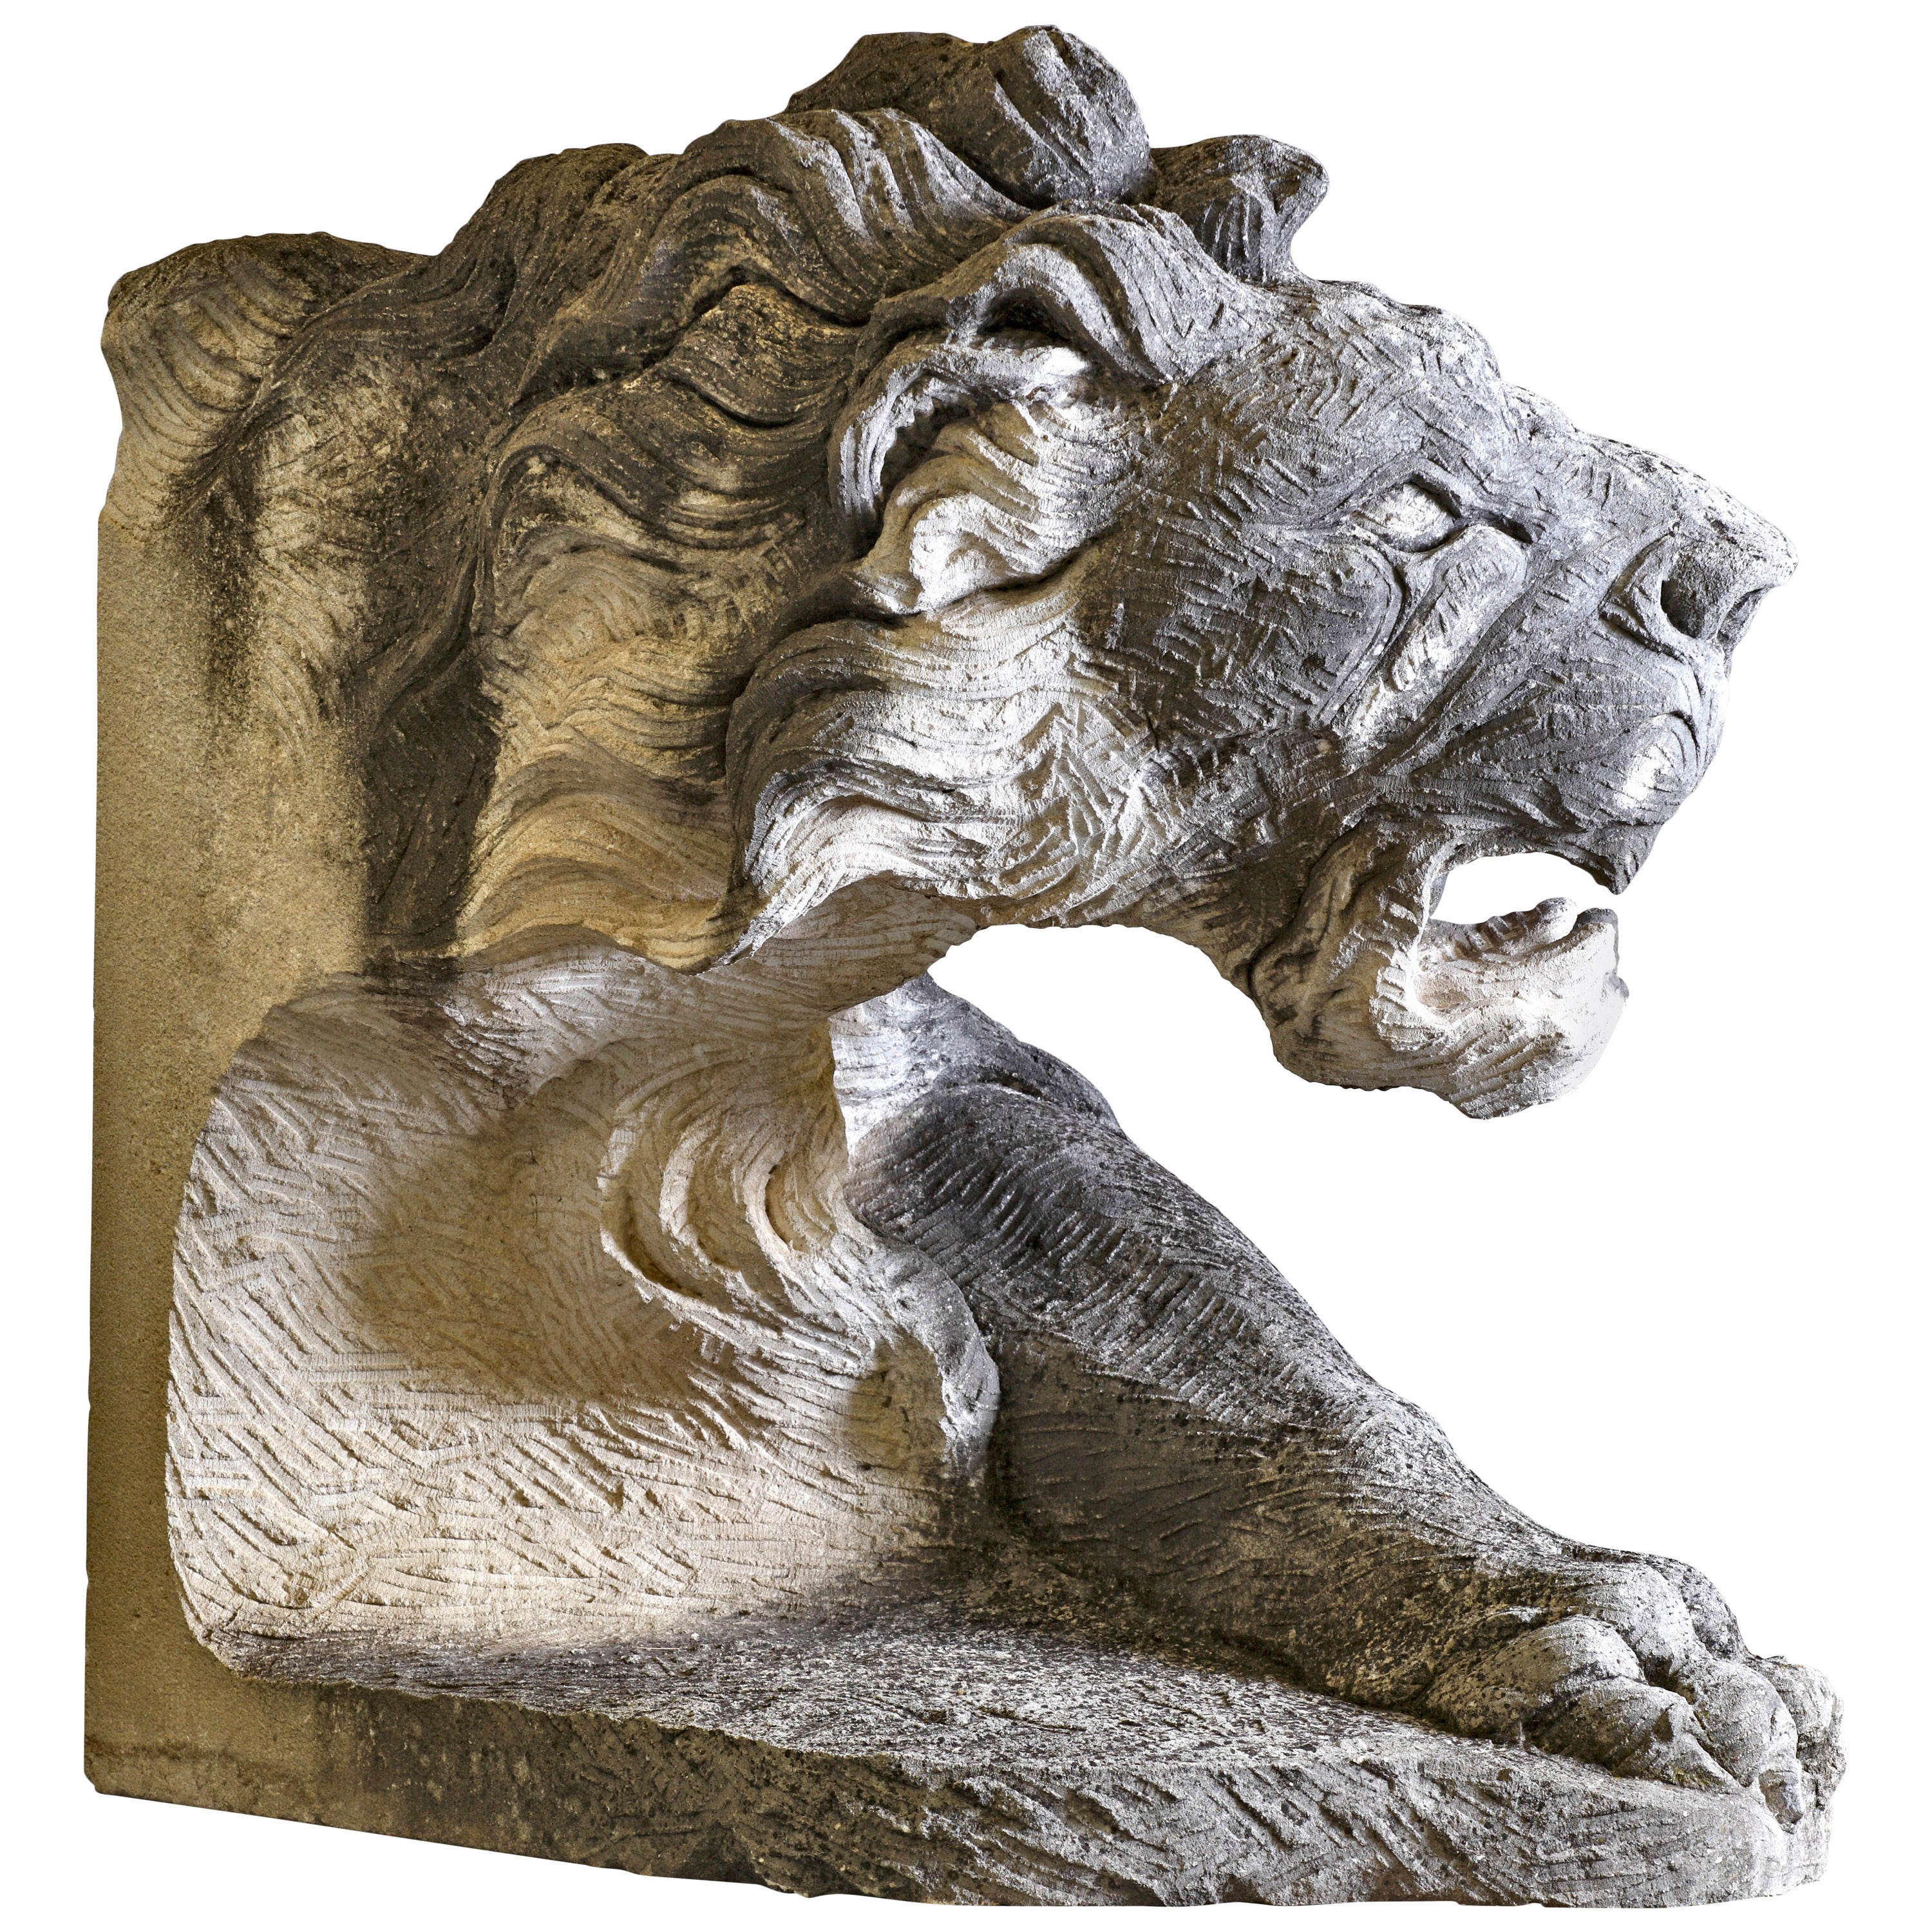 Sculpted Limestone Model of a Lion's Head and Torso